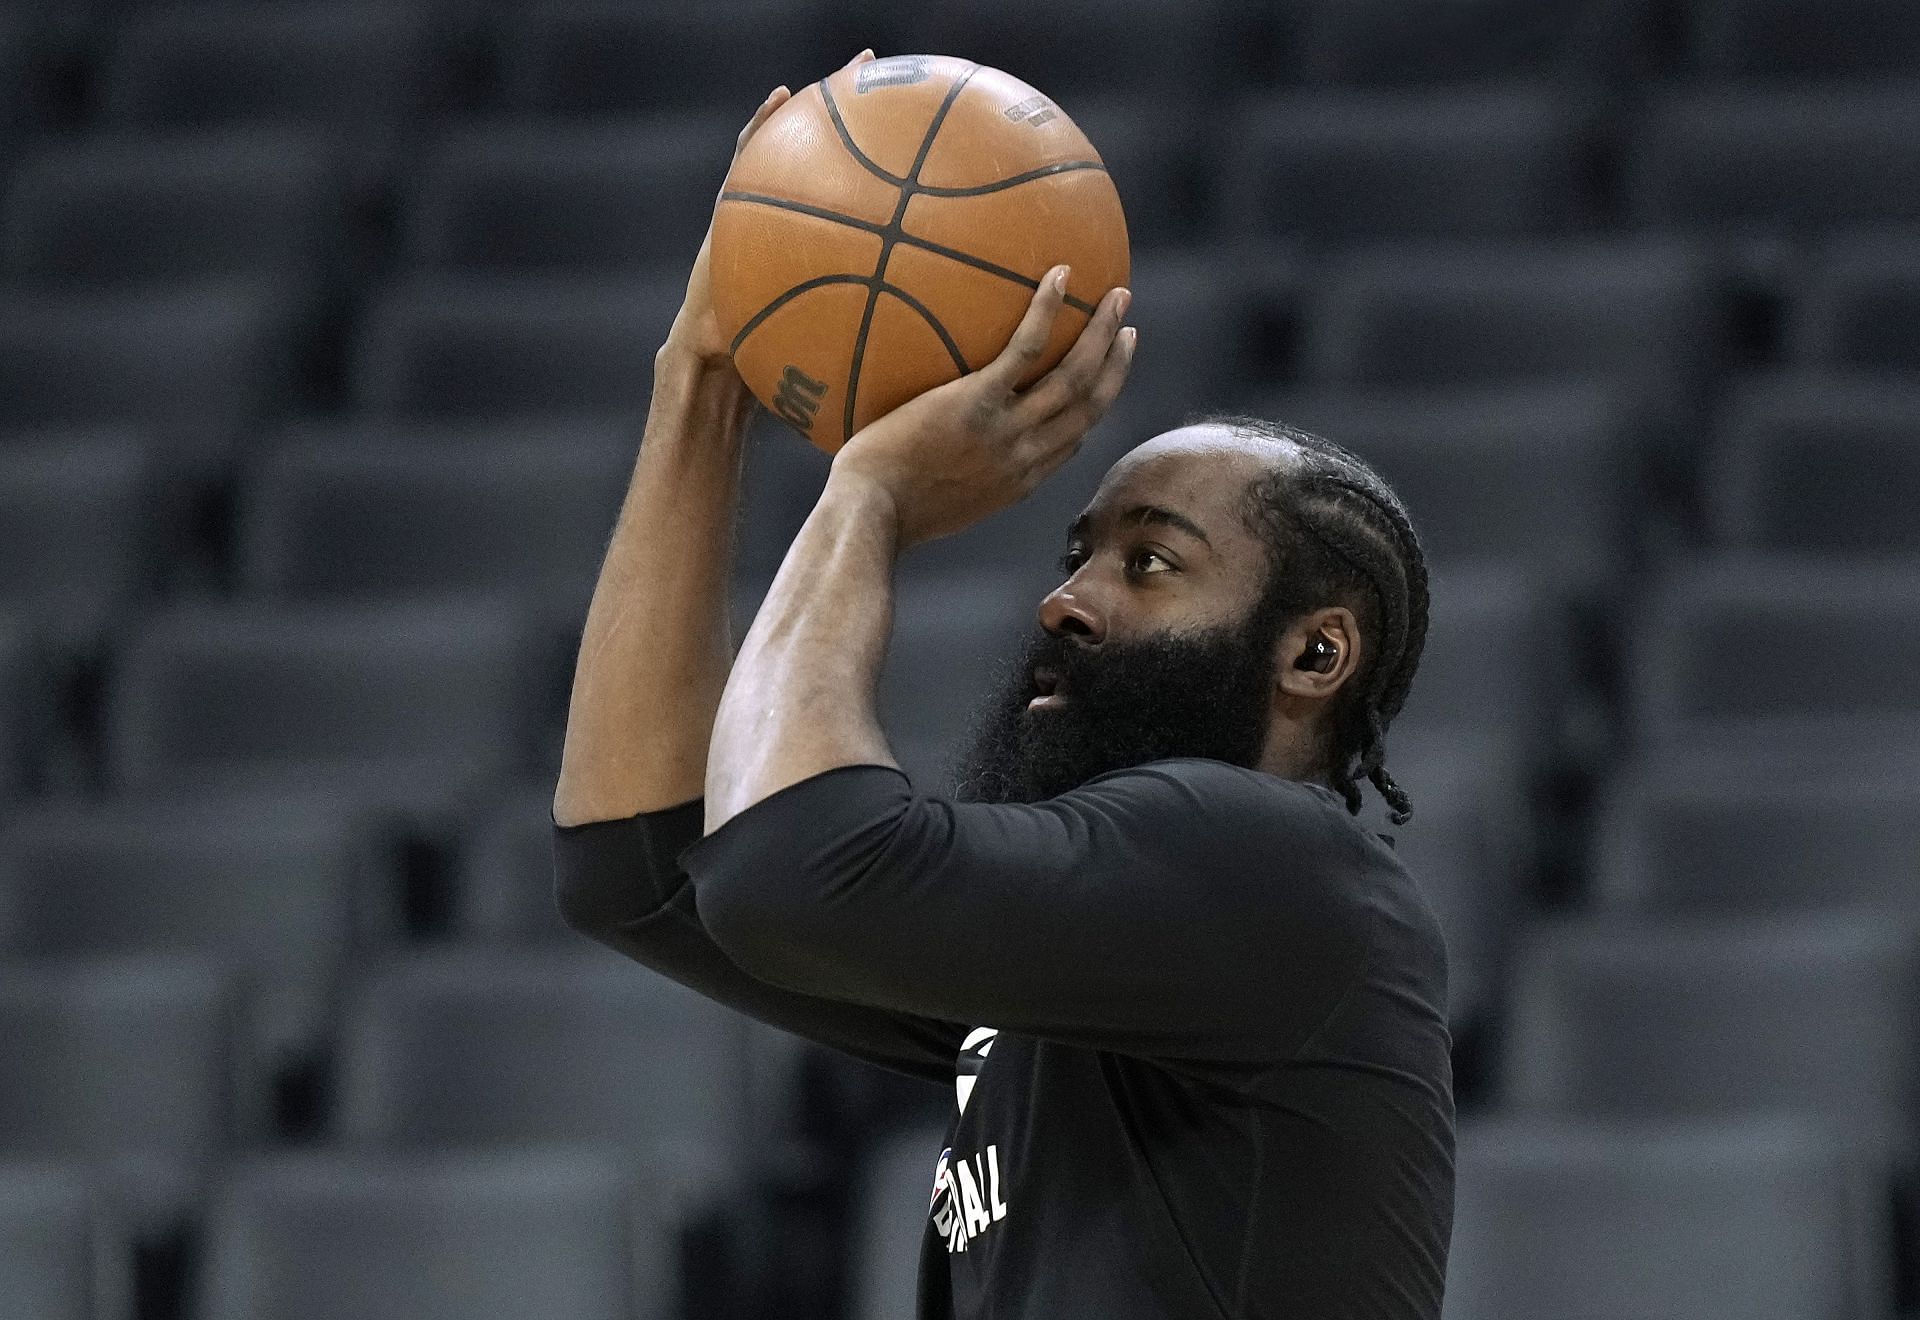 Harden warming up on the court